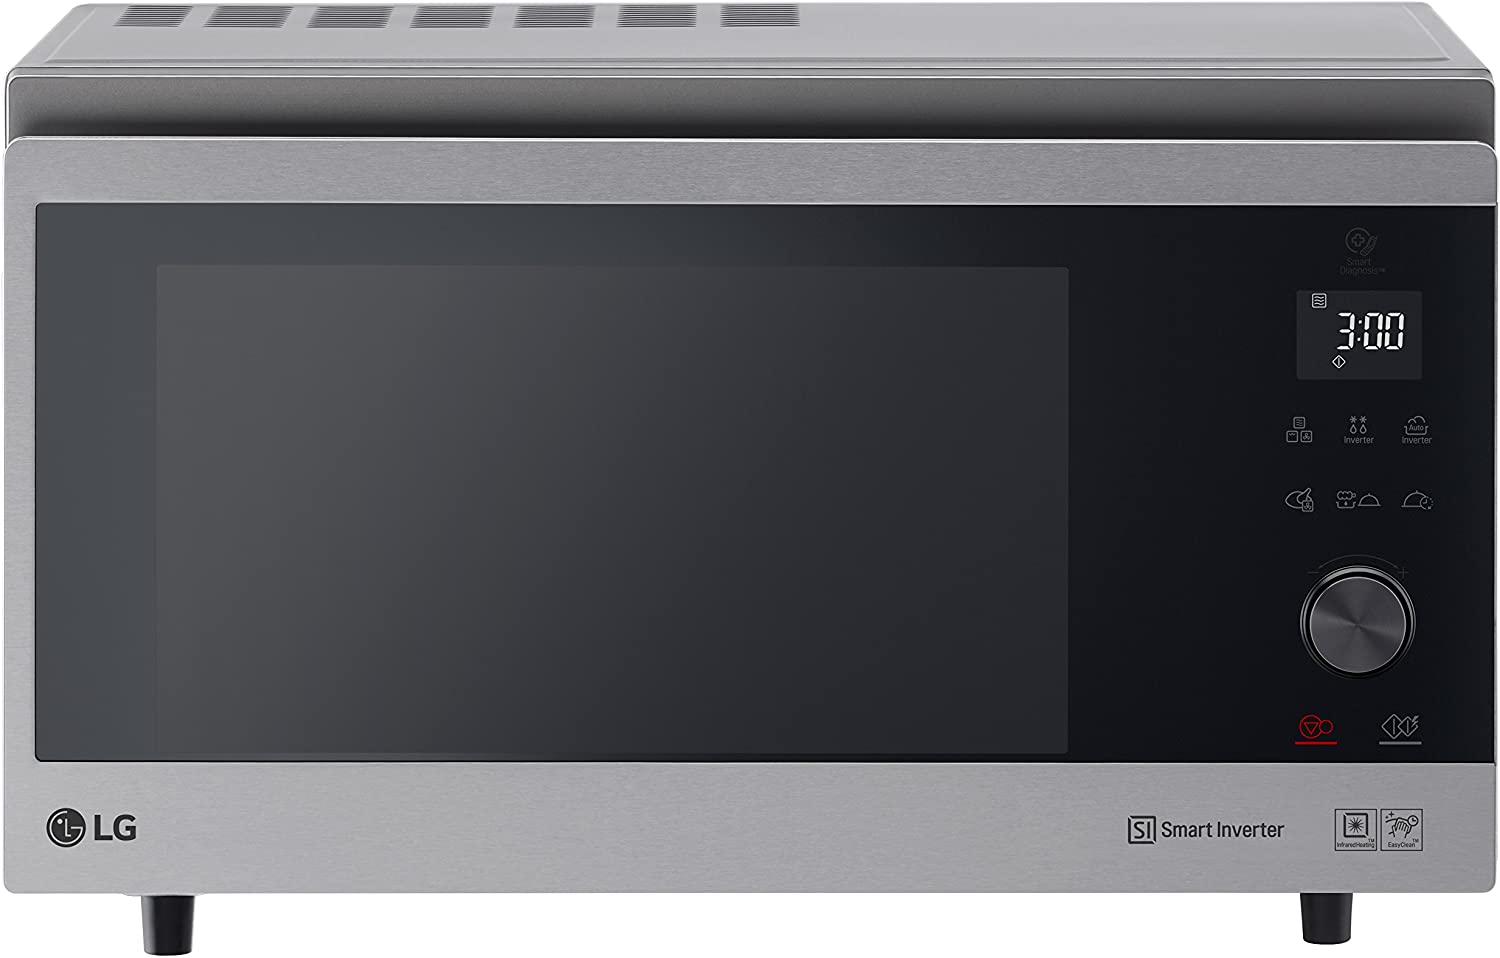 We tested LG's Smart Inverter, a 4-in-1 microwave oven that will make